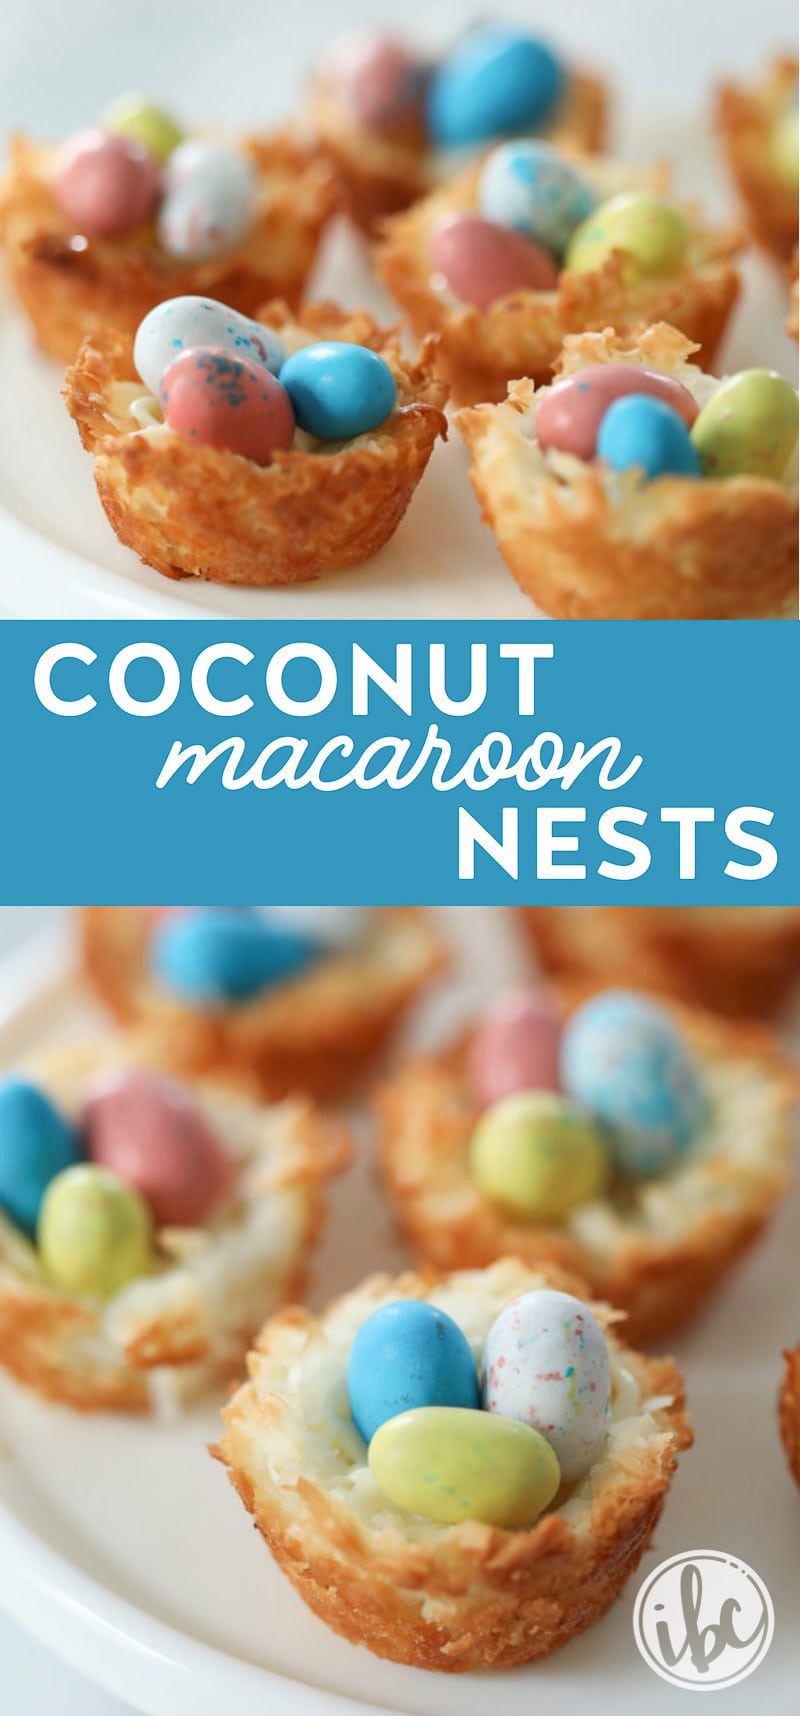 These Coconut Macaroon Nests are a must #spring #entertaining #dessert #recipe. You will love them!